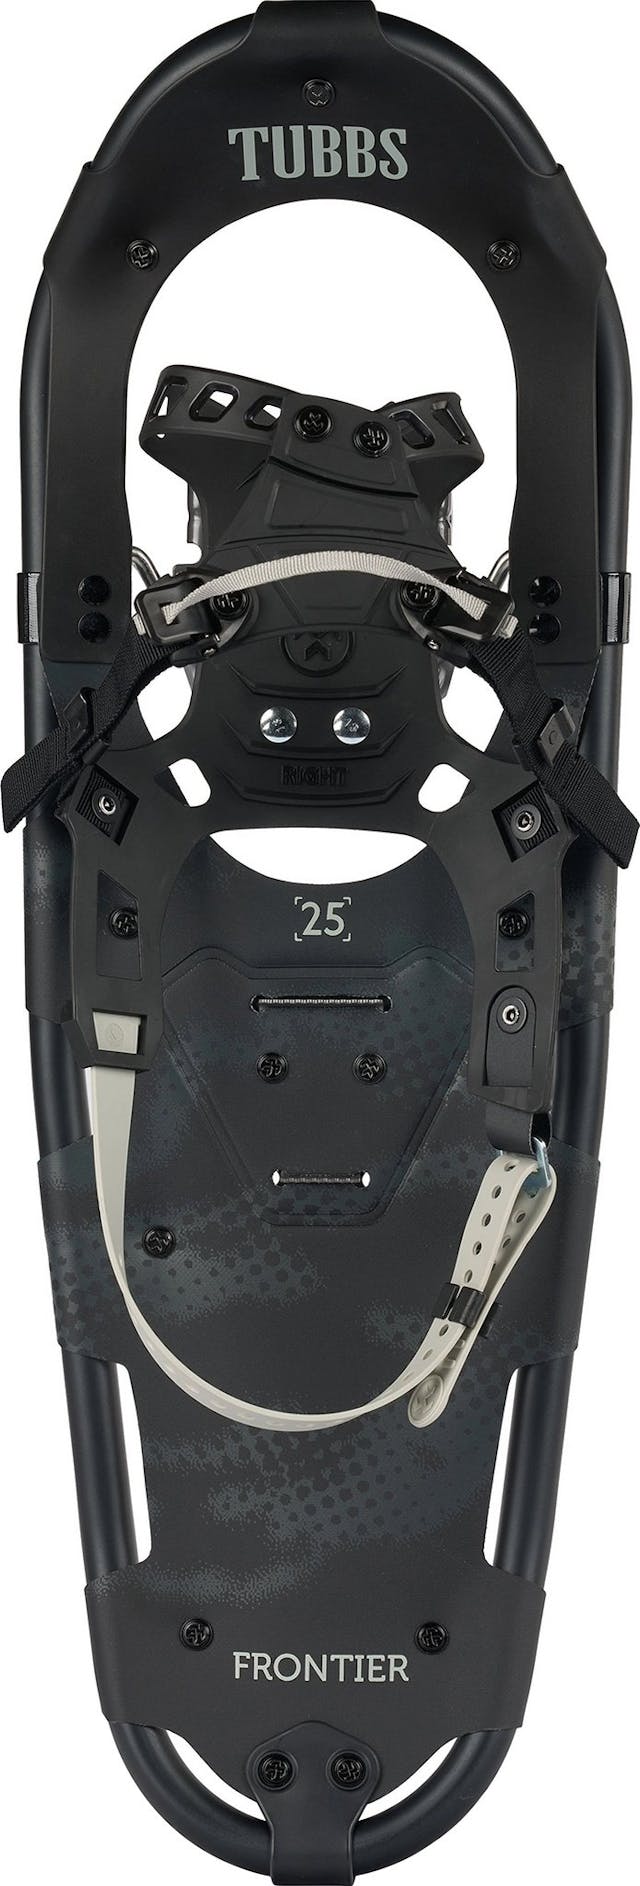 Product image for Frontier Snowshoes - Men's